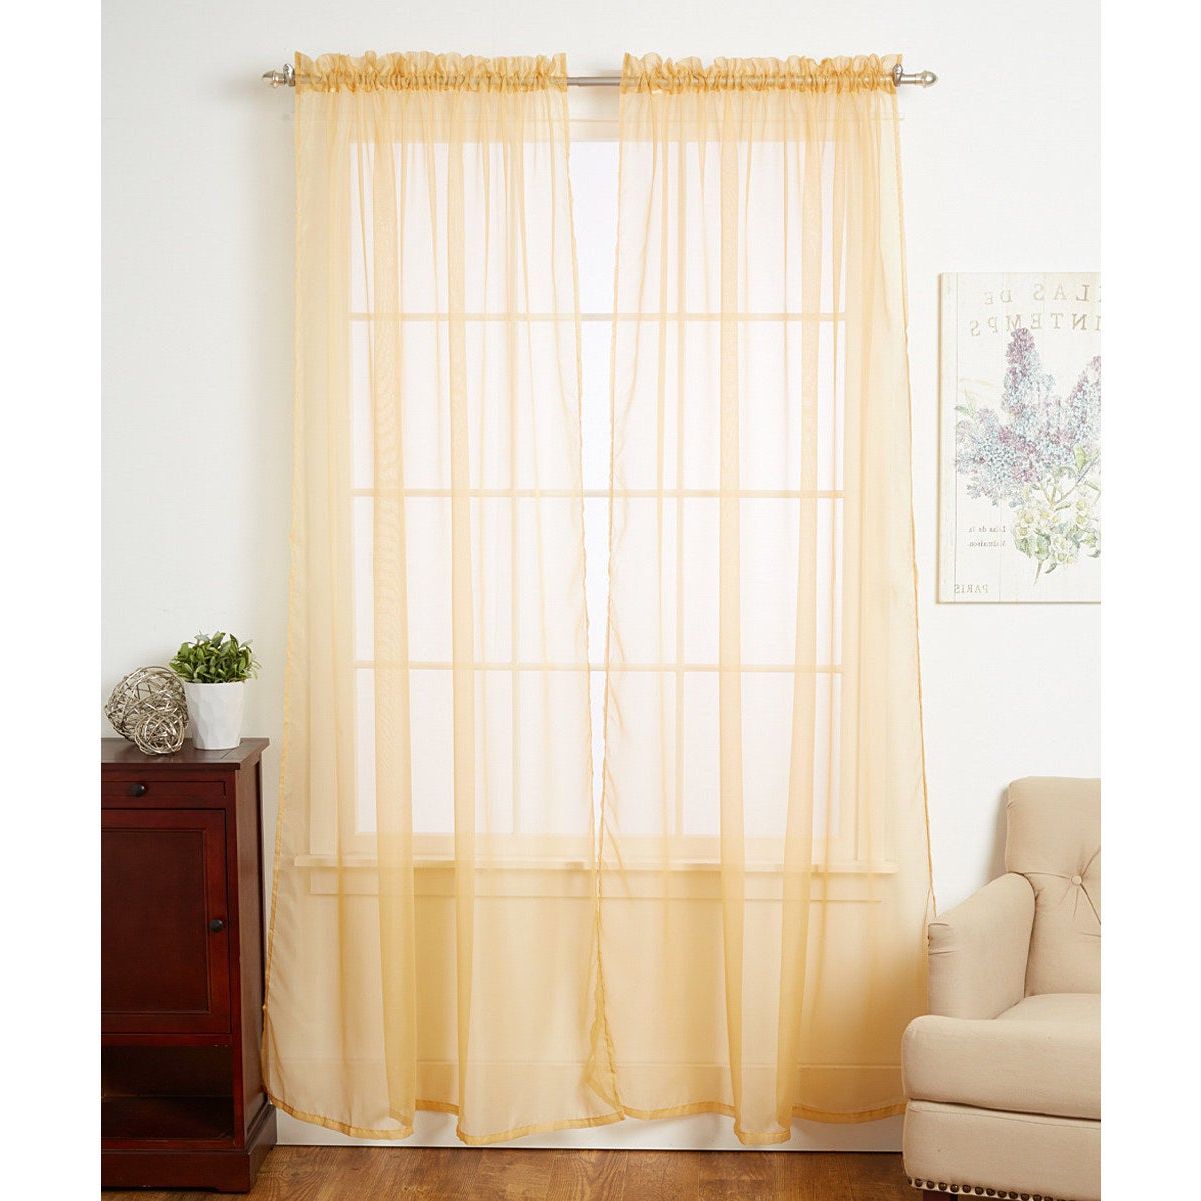 Recent Pairs To Go Victoria Voile Curtain Panel Pairs With Linda Sheer Voile 4 Pack Window Curtain Panel Pairs – 55 X  (View 18 of 20)